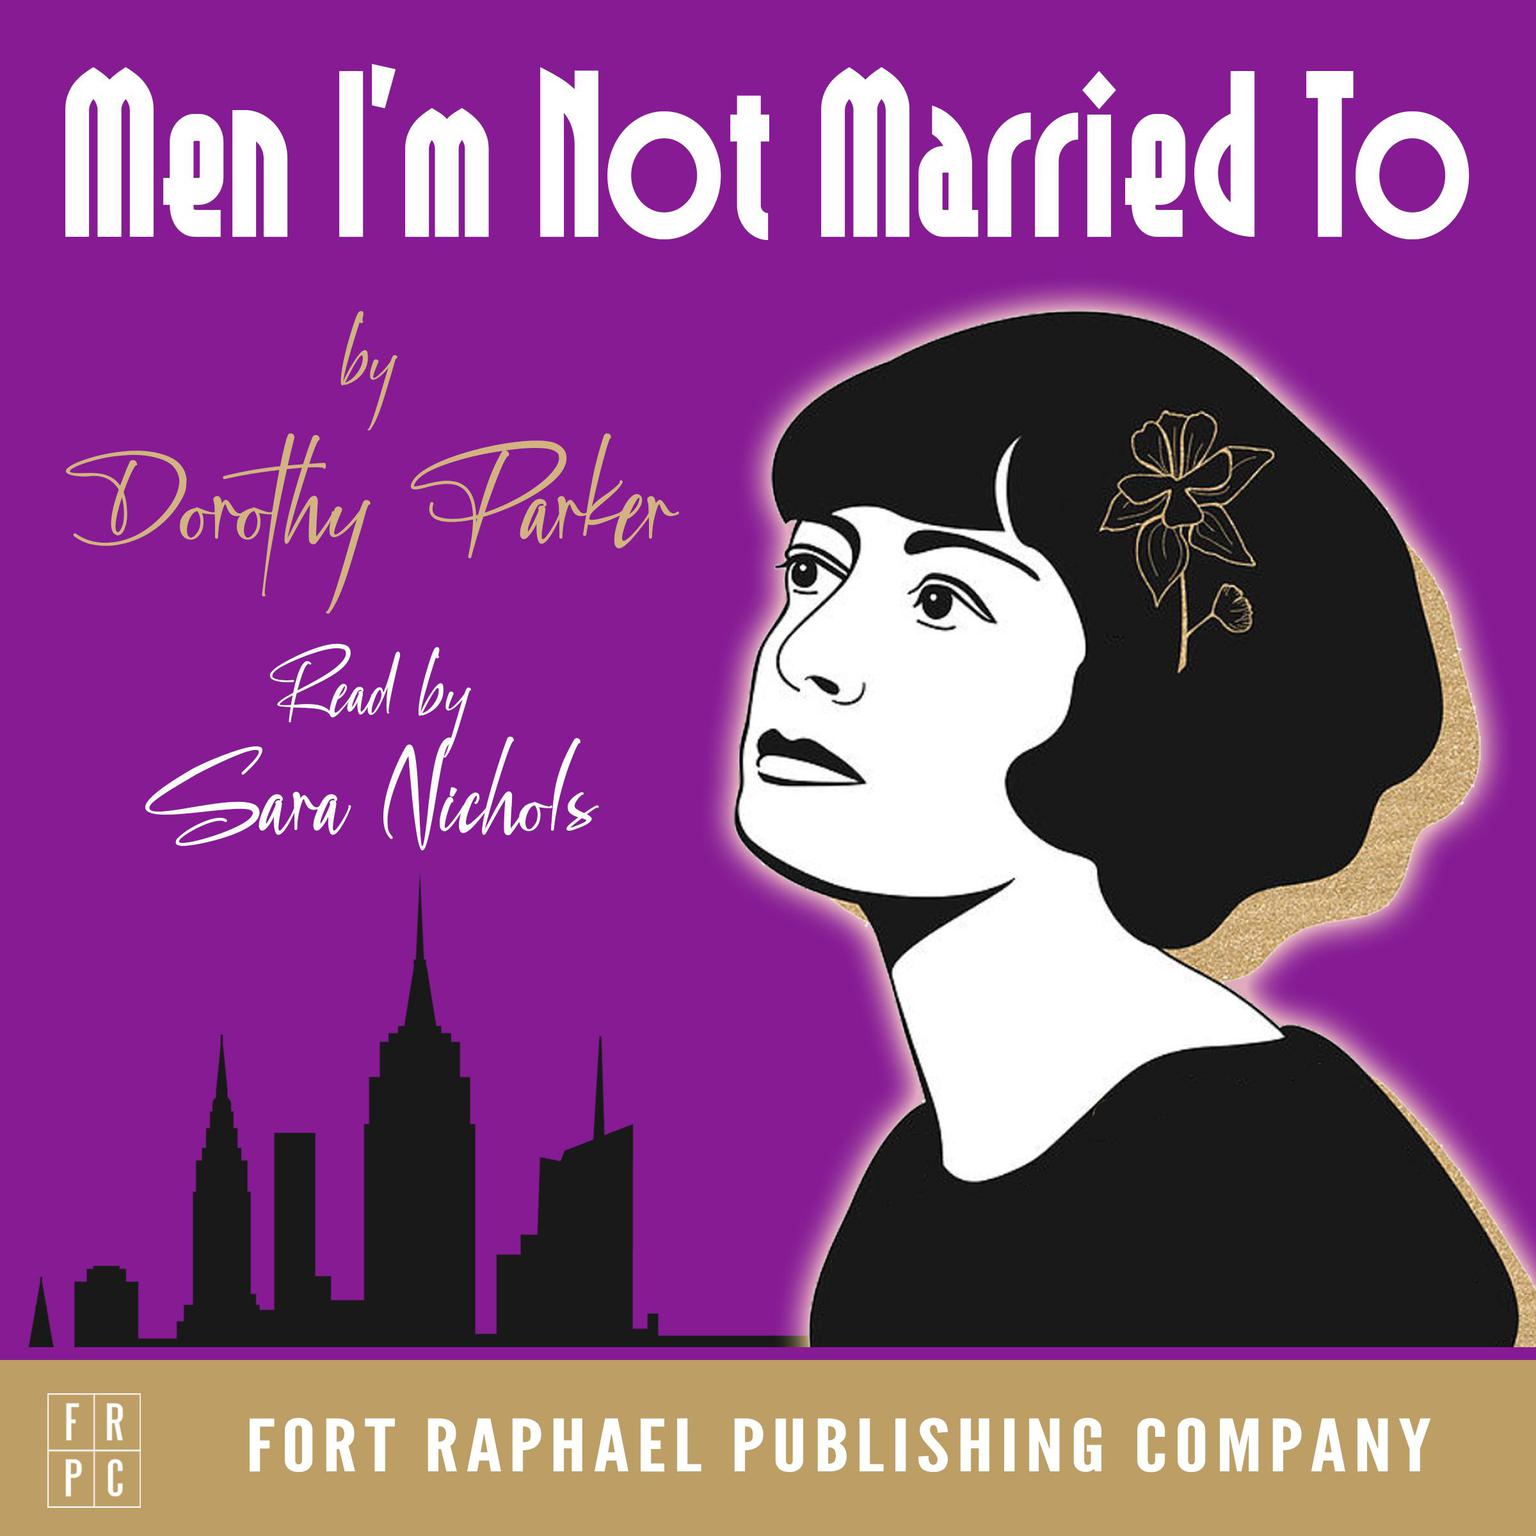 Dorothy Parkers Men Im Not Married To - Unabridged Audiobook, by Dorothy Parker